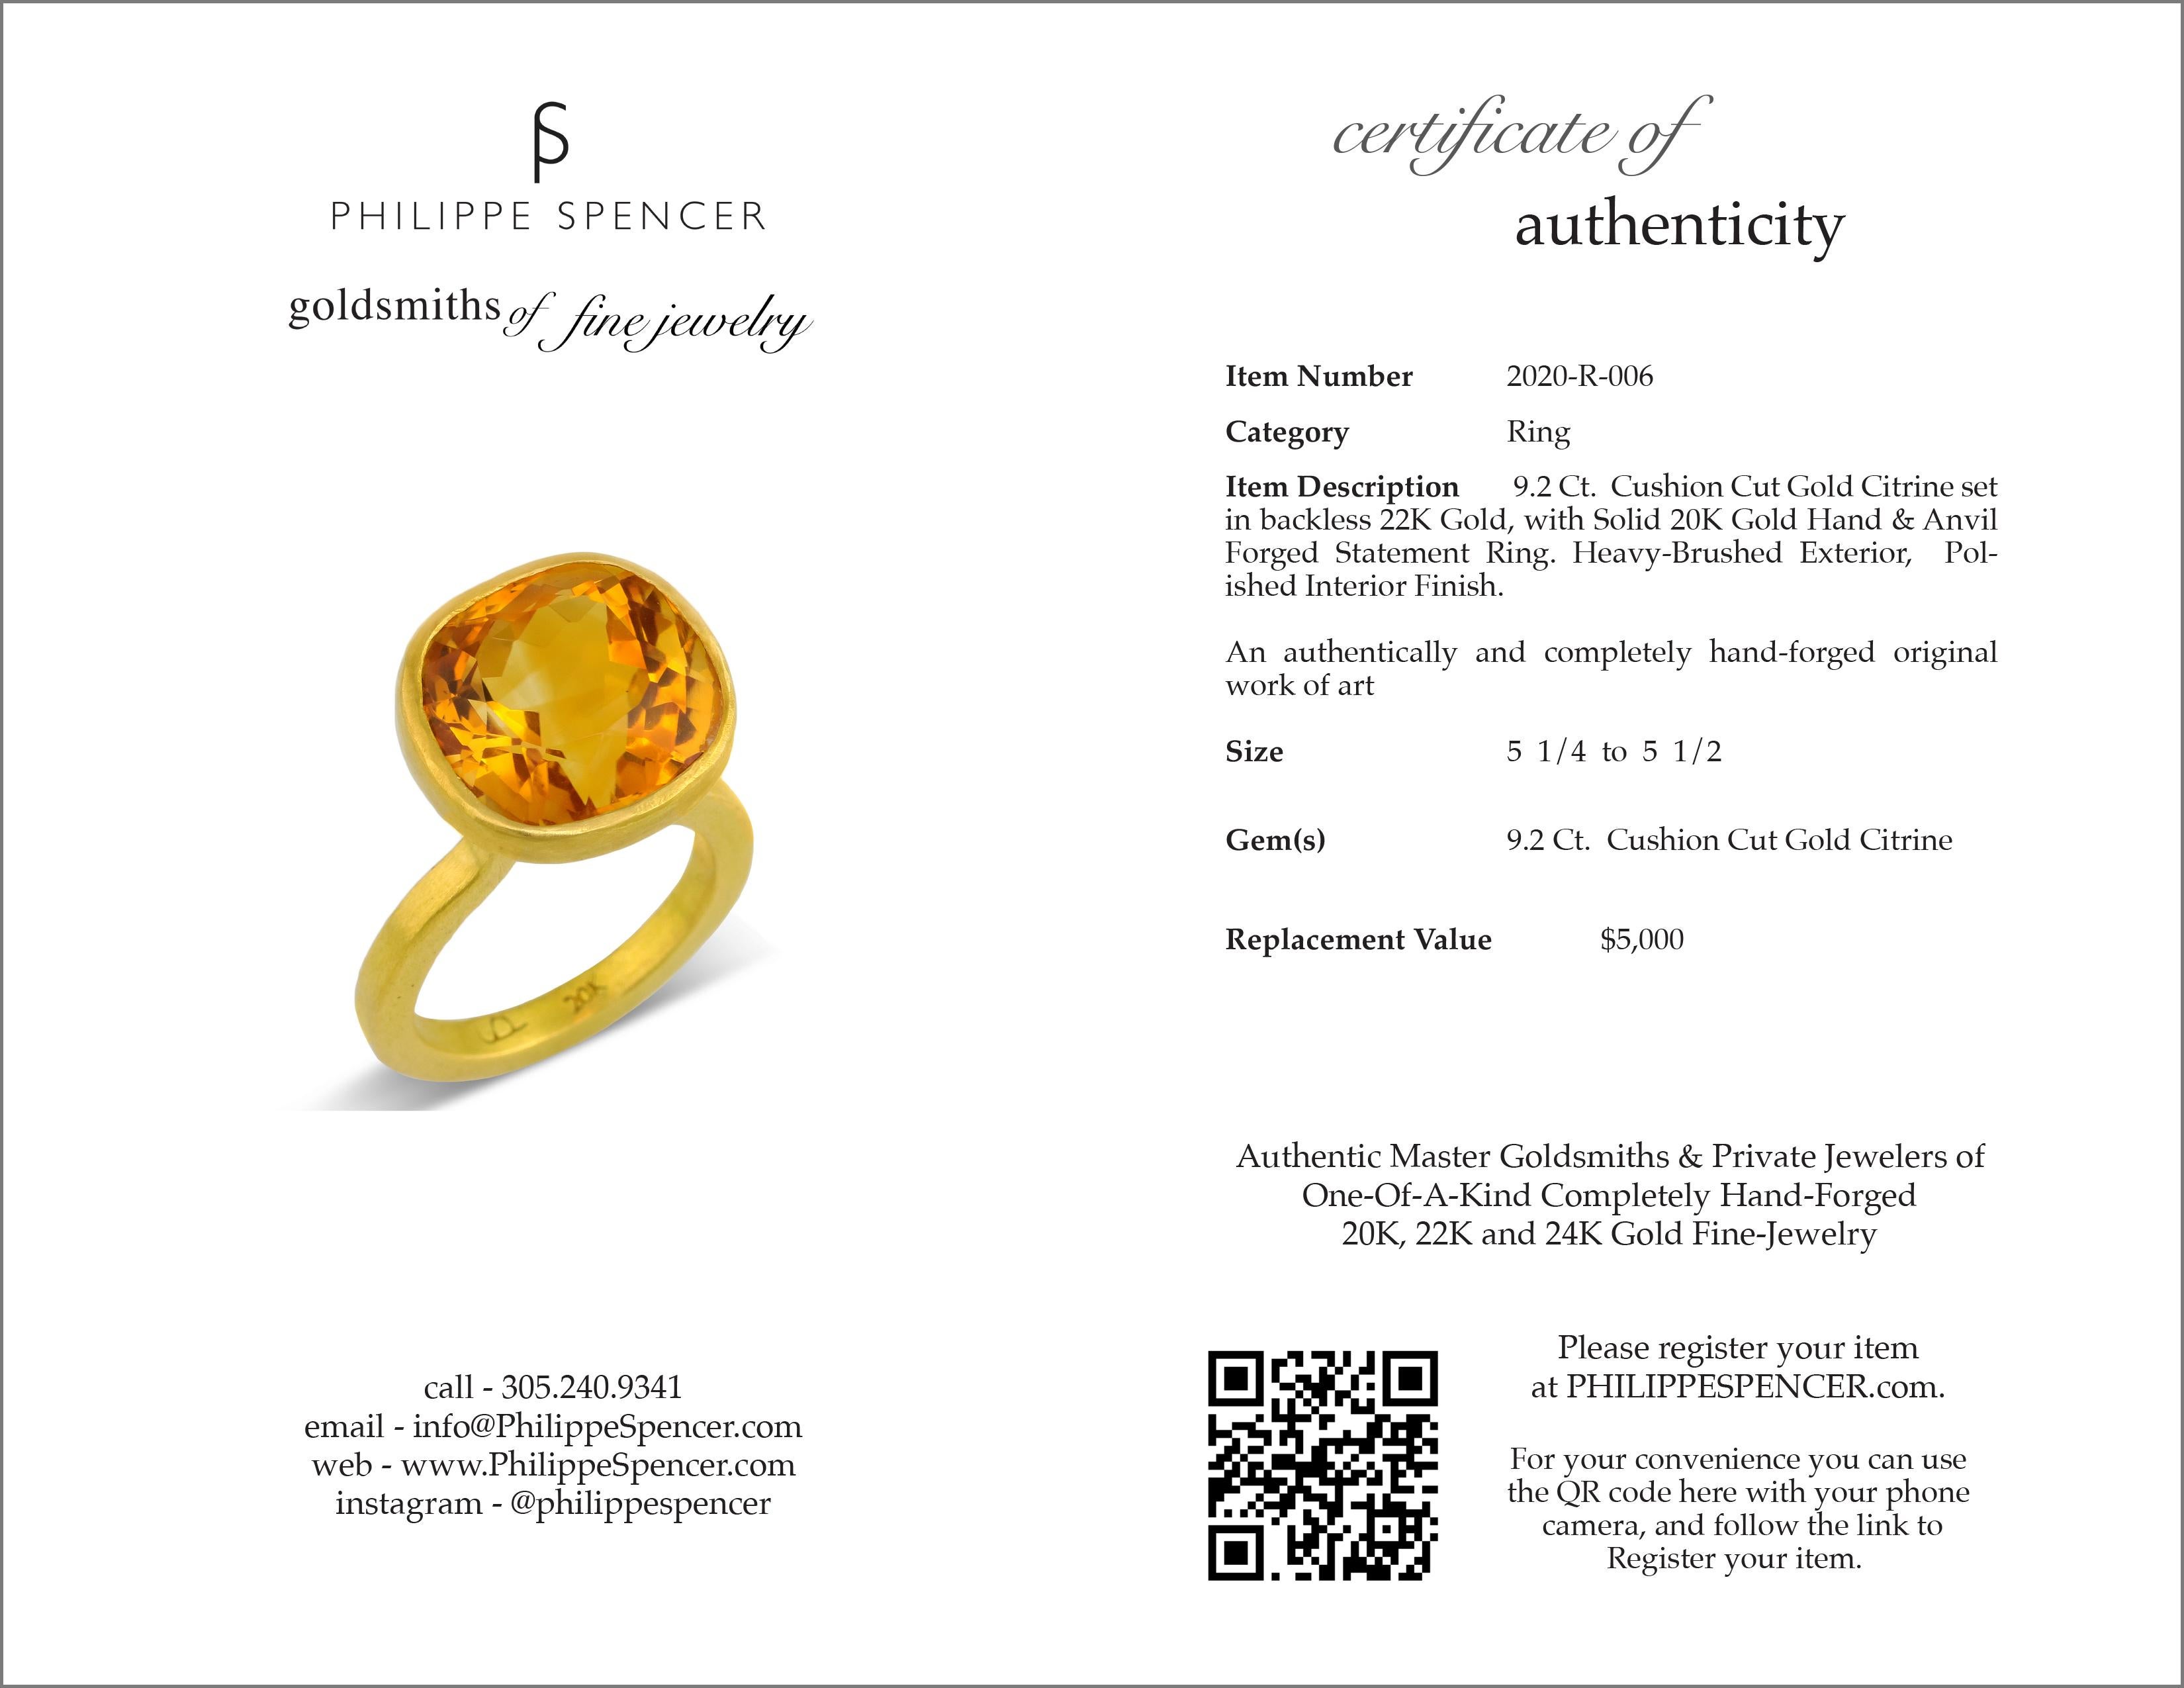 Artisan PHILIPPE SPENCER 9.2 Ct. Gold Citrine in 22K and 20K Gold Statement Ring For Sale